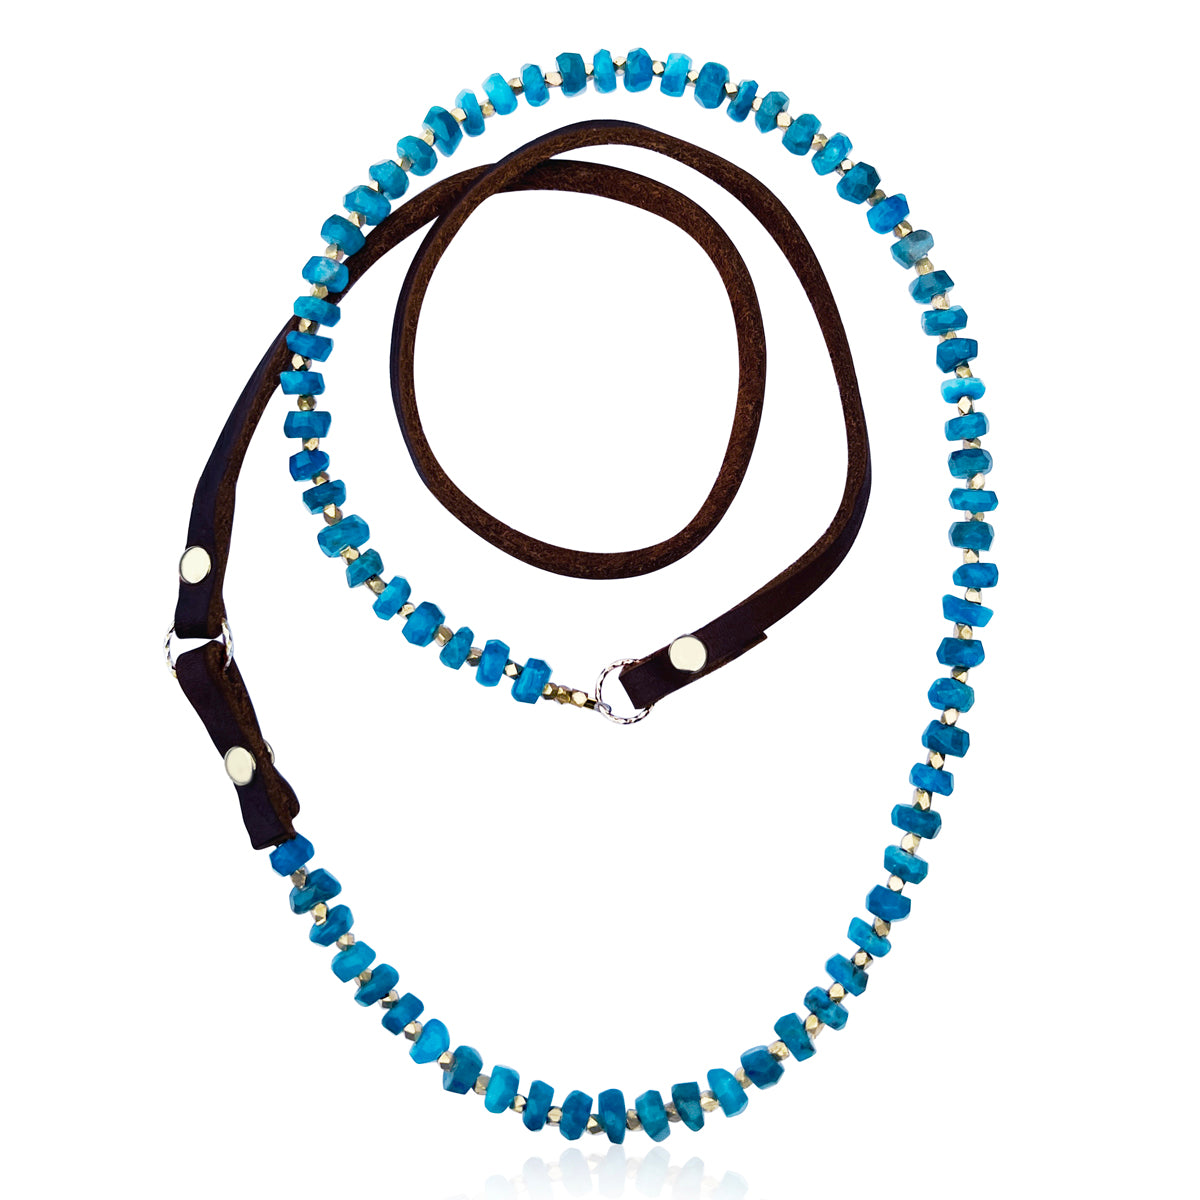 "True Self Discovery: Apatite Confidence Necklace" is a remarkable embodiment of personal growth and empowerment. 